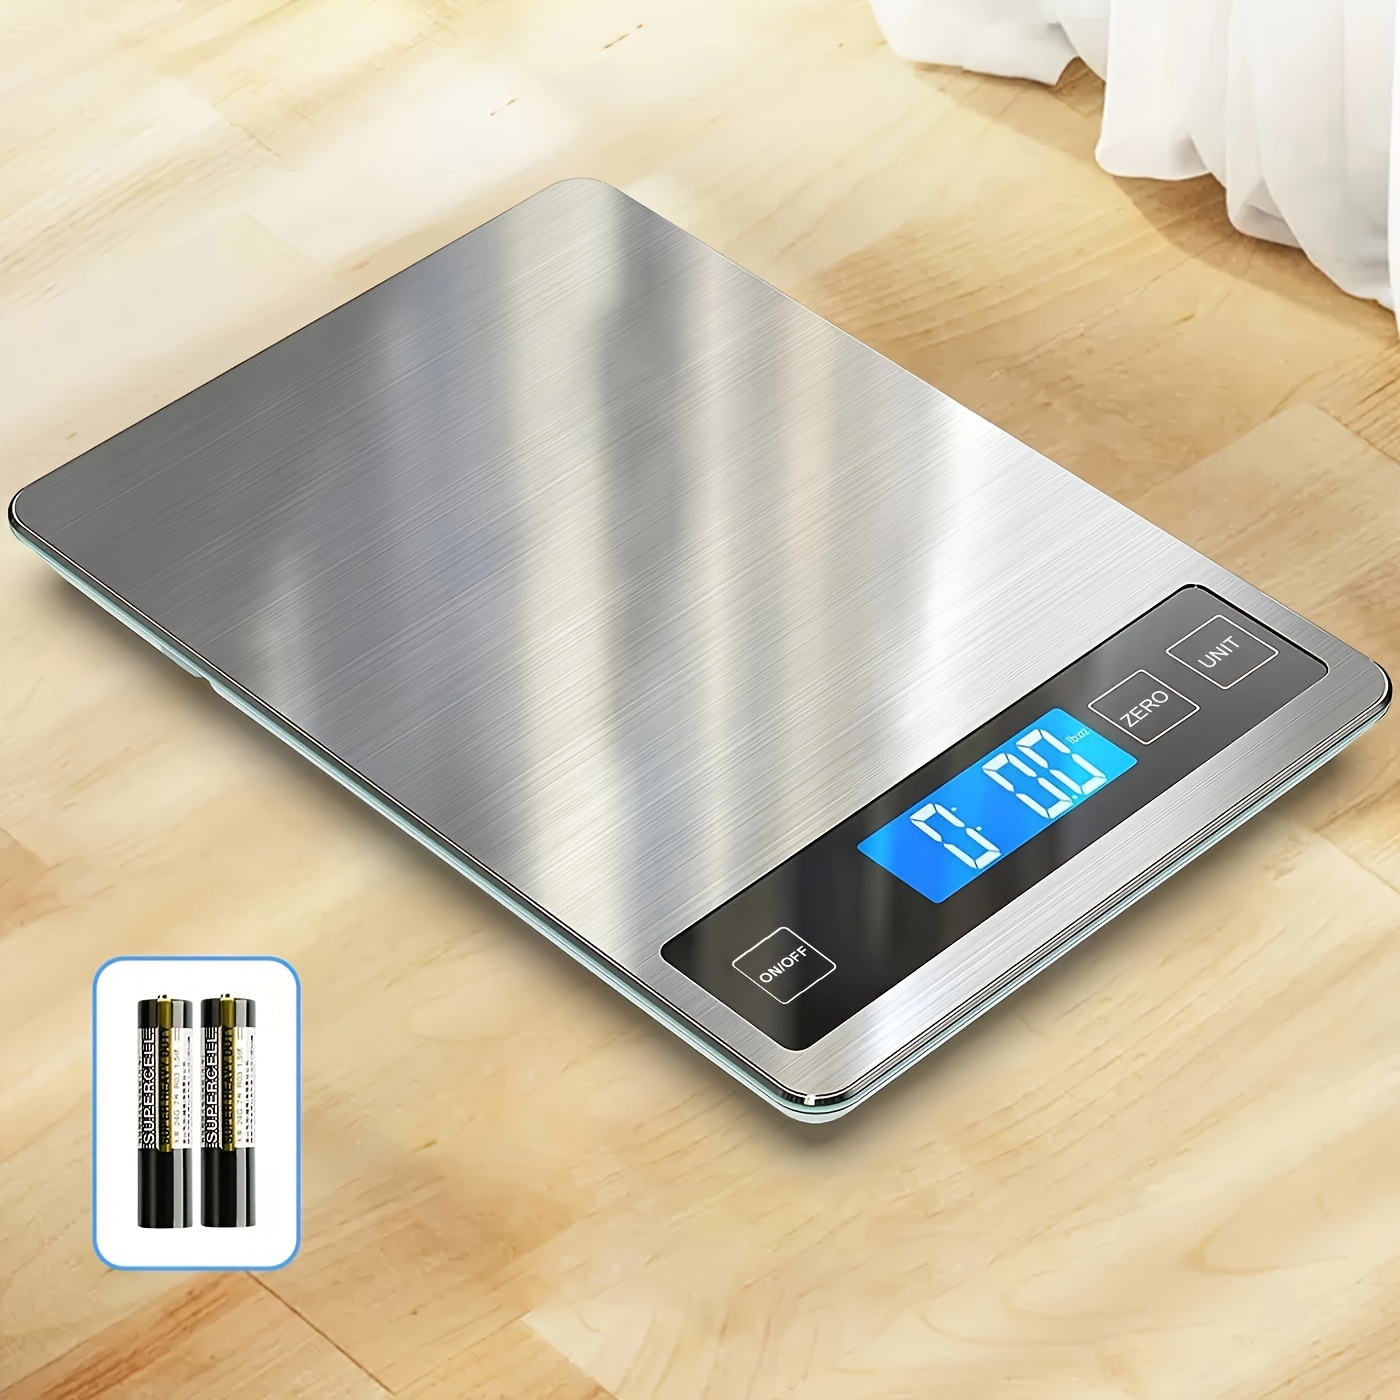 Food Scale, Digital Kitchen Scale Weight Grams And Oz For Cooking